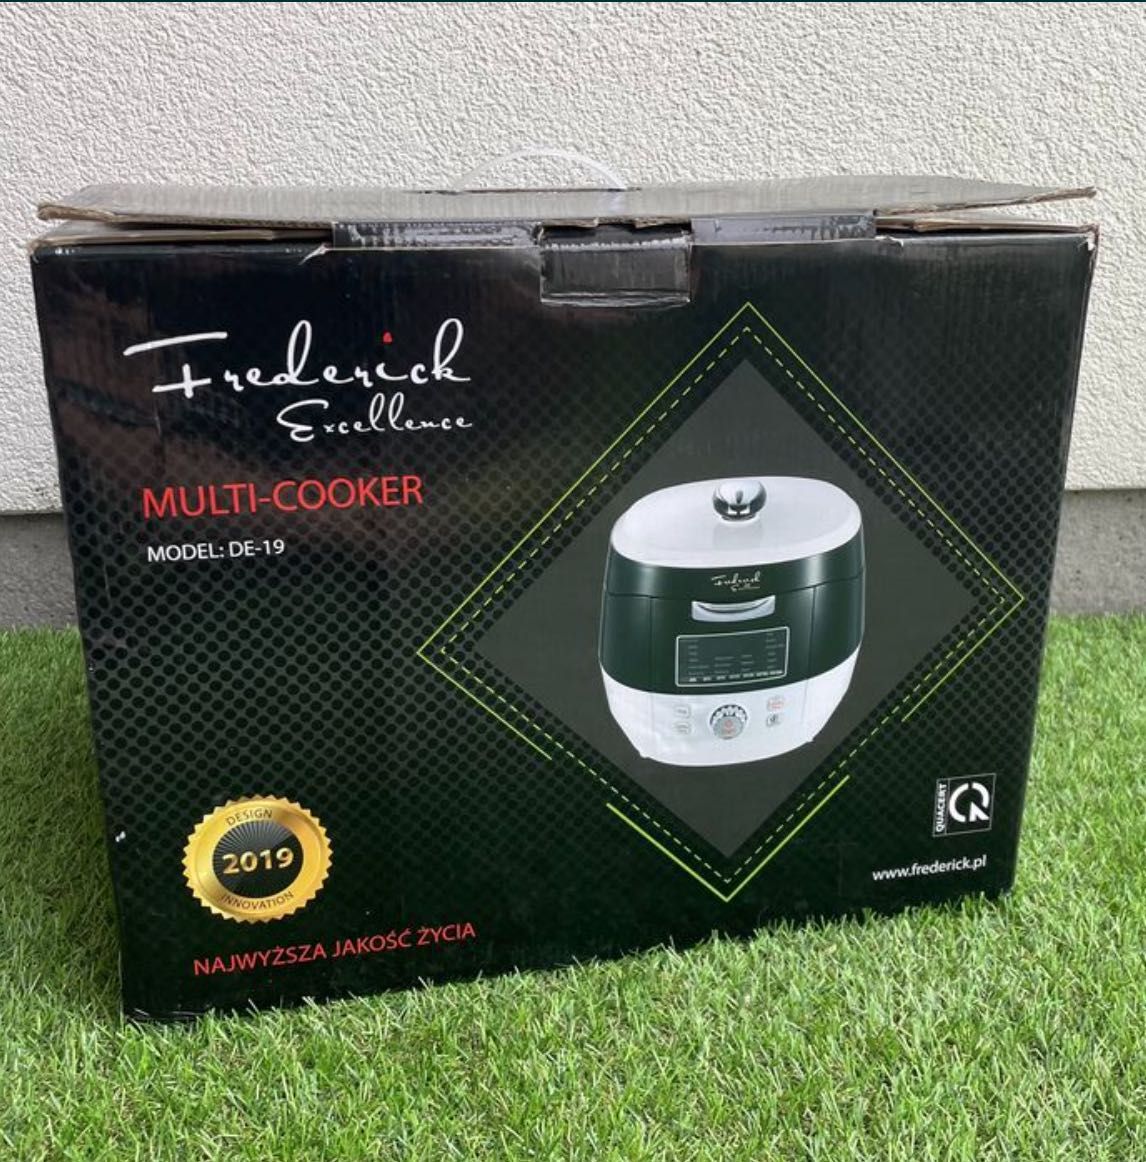 Nowy Multi Cooker FREDERICK EXCELLENCE thermomix szybkowar + GRATIS